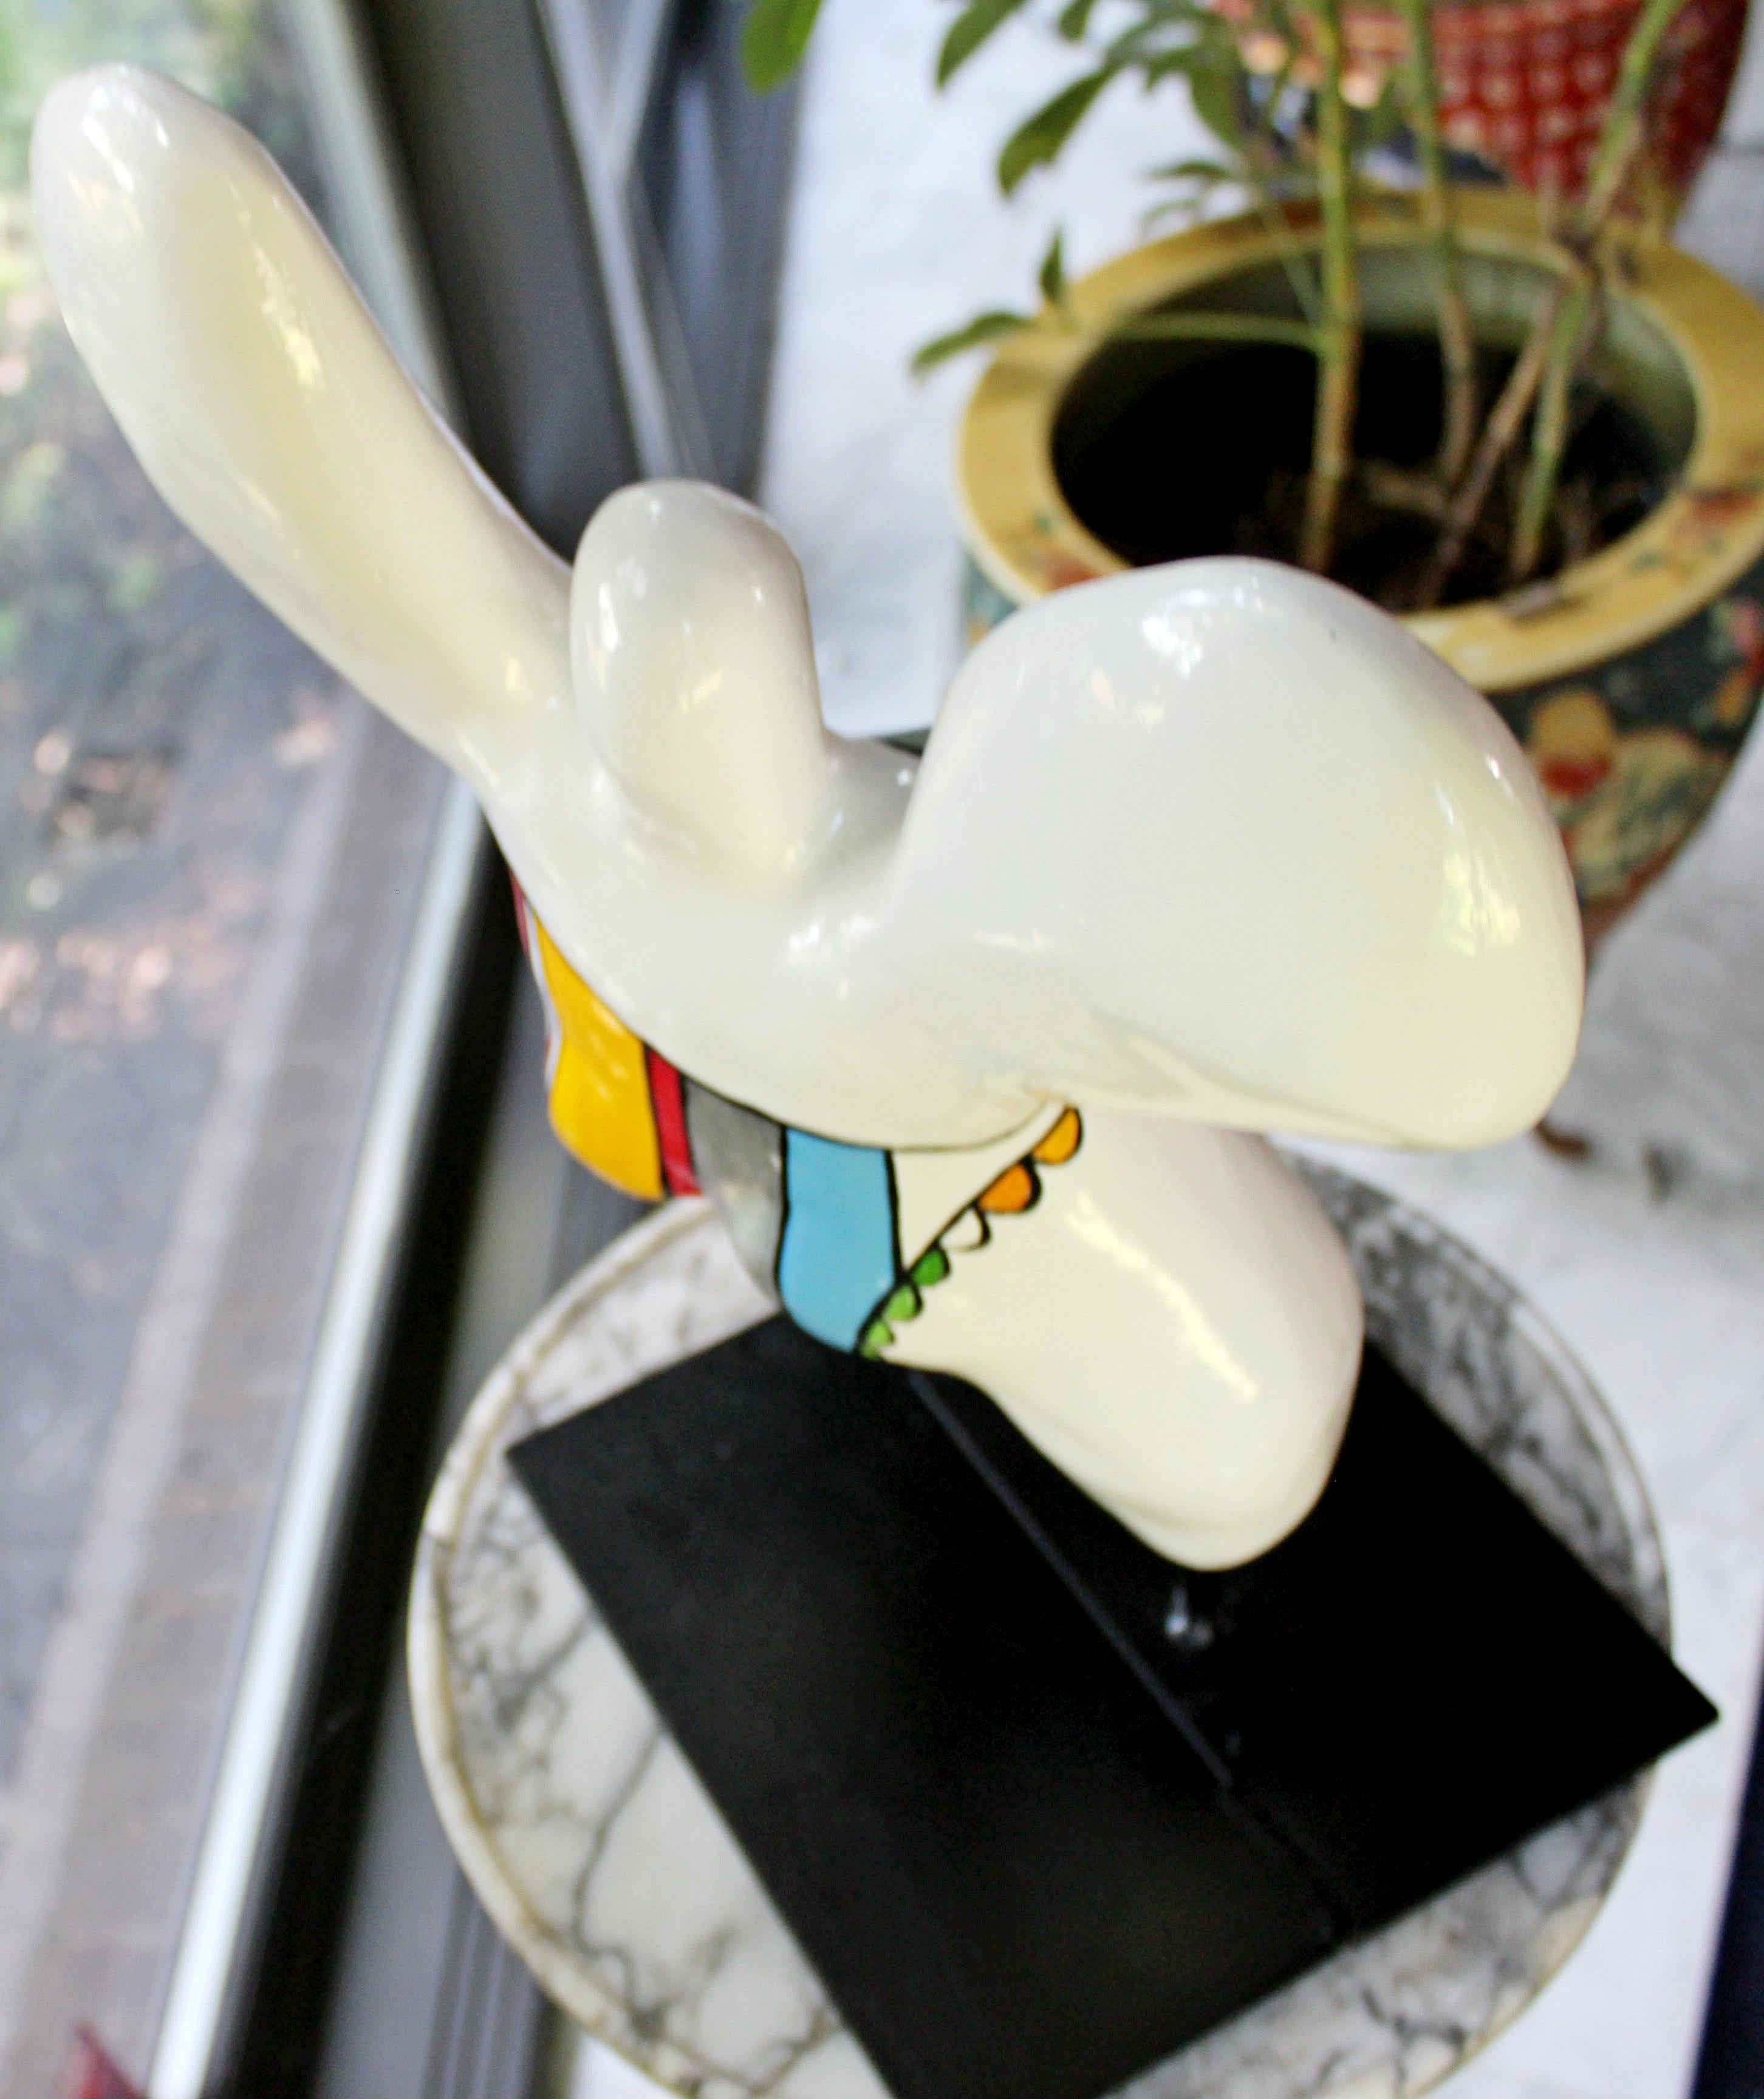 Late 20th Century Contemporary Modern Ceramic Table Sculpture Signed, 1990s Karel Appel Style